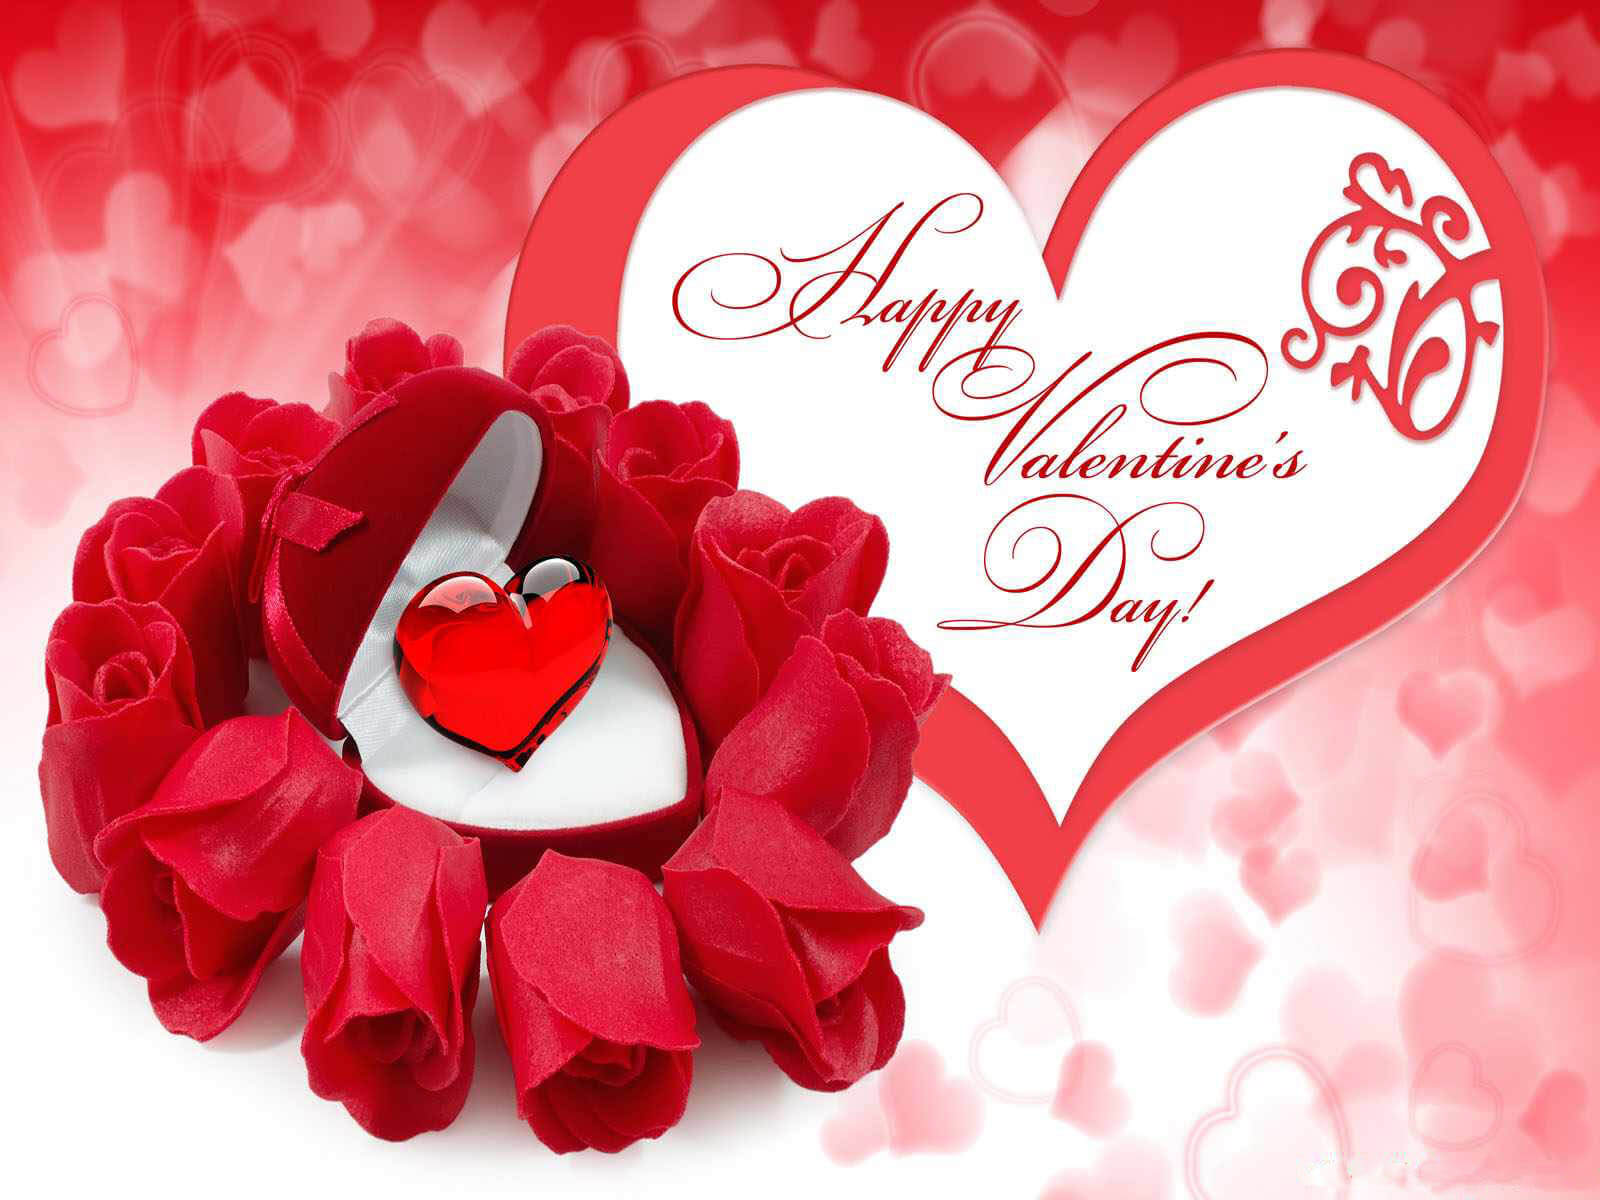 Happy Valentines Day Red Roses With Heart HD Wallpaper Image